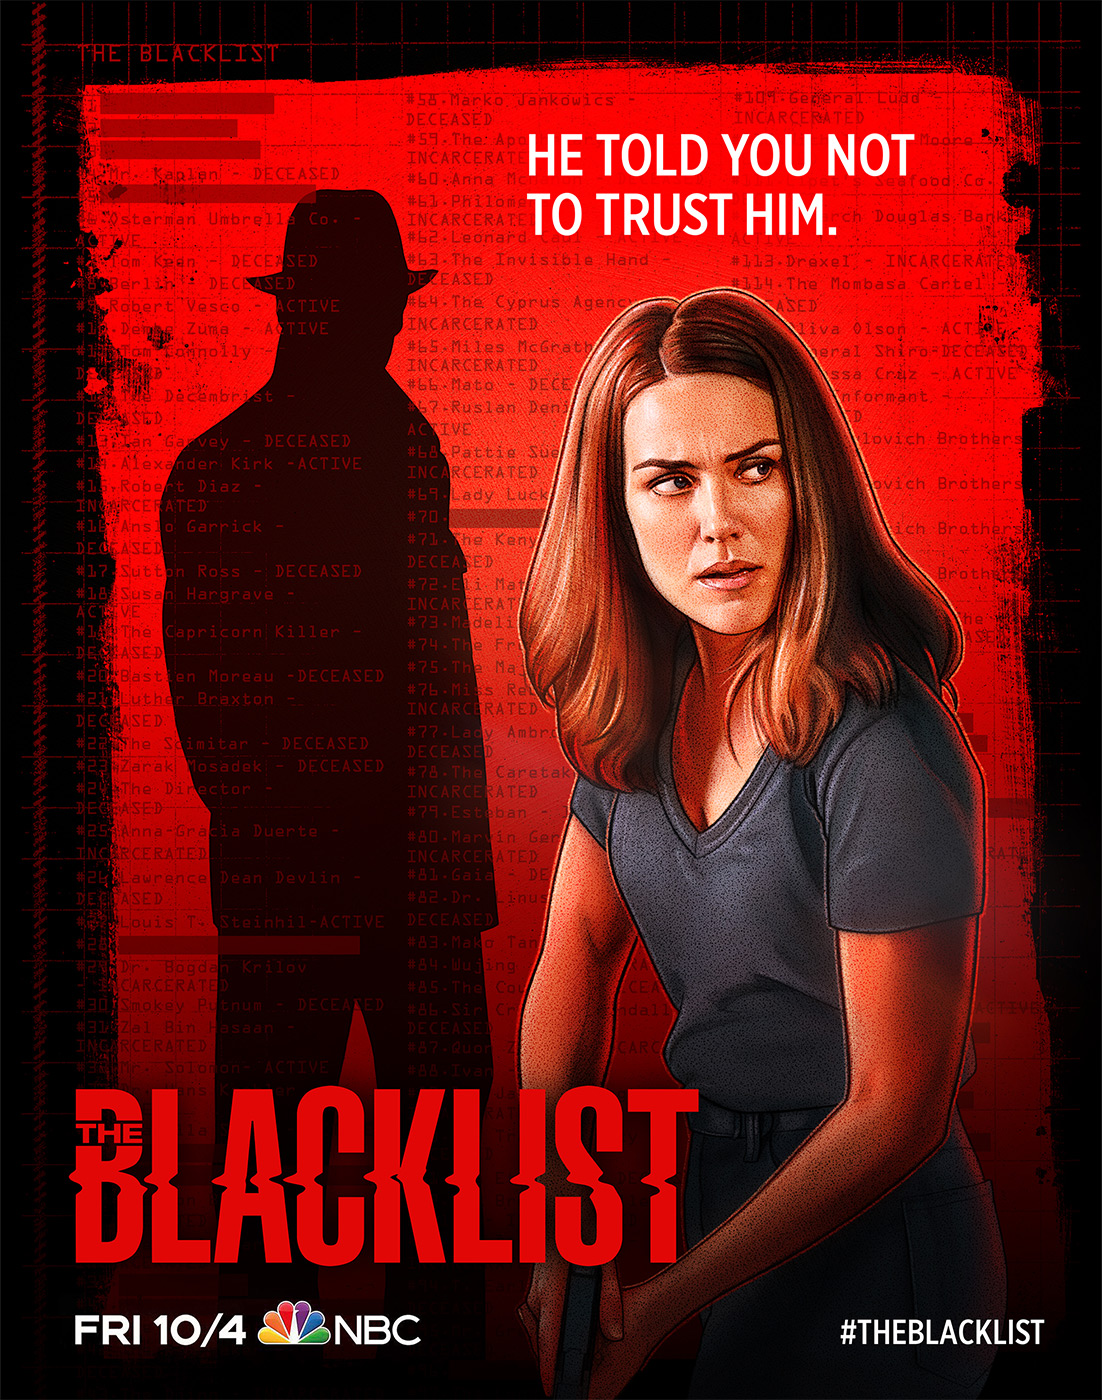 The Blacklist Season 7 Poster - He Told You Not To Trust Him by Kyle Lambert